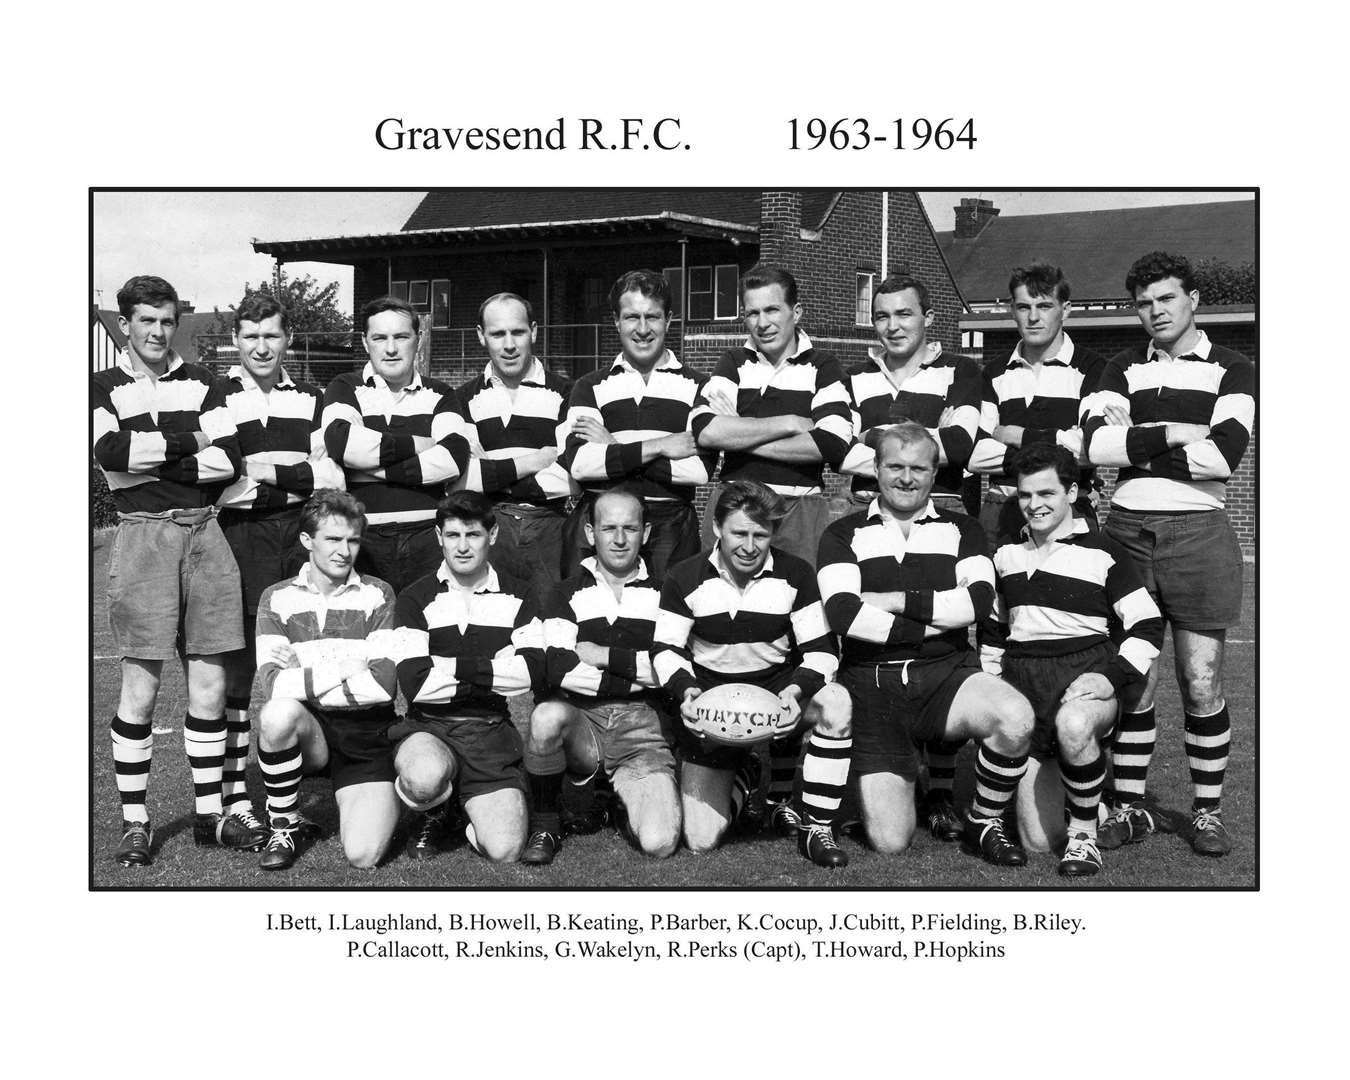 The Gravesend Rugby Football Club team pictured in 1963/64